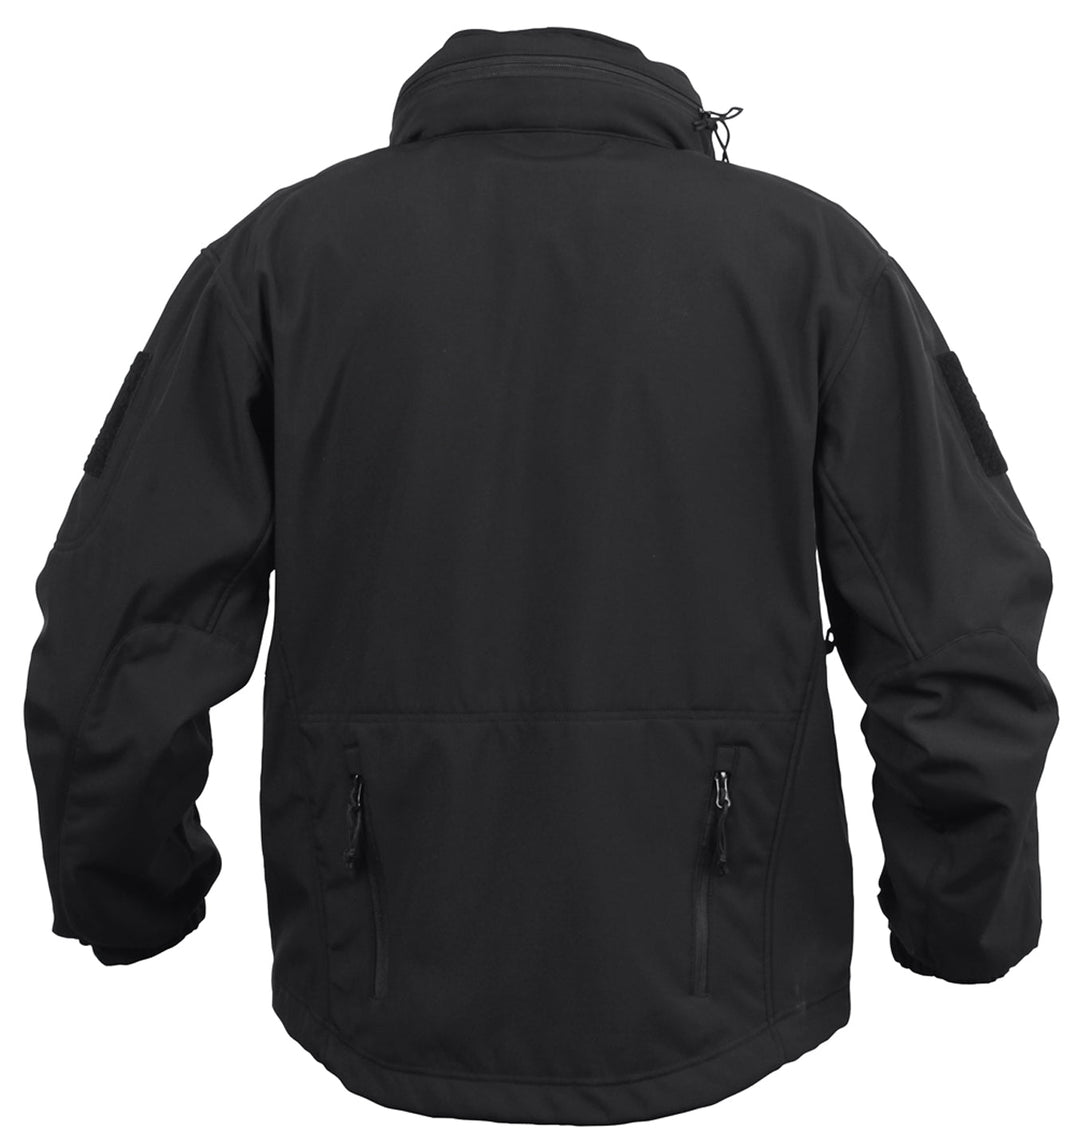 Rothco Mens Concealed Carry Soft Shell Jacket (Black) Size XLARGE - Final Sale Ships Same Day